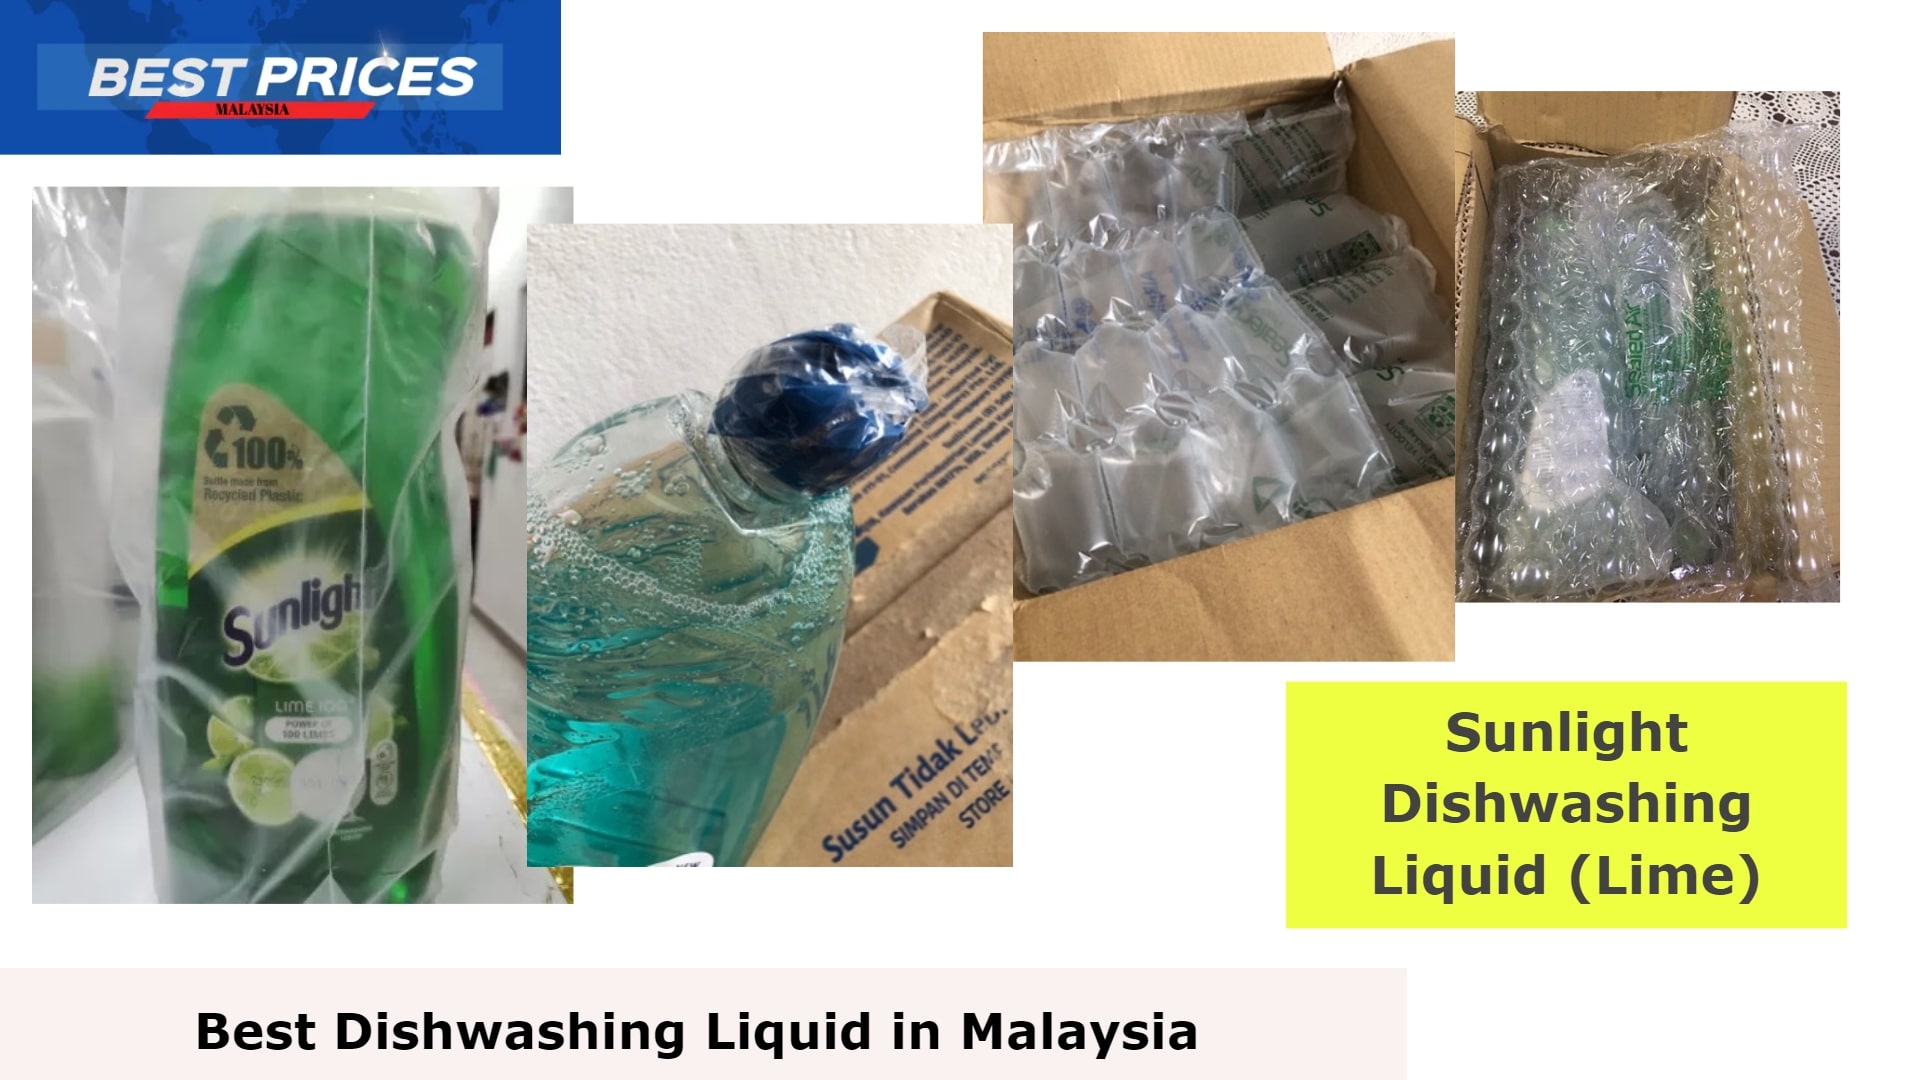 Sunlight Dishwashing Liquid (Lime) - Dishwashing Liquid Malaysia, What is a dishwashing liquid used for?, Is dishwashing liquid useful or harmful?, What is the difference between detergent and dishwashing liquid?, What is the most popular dishwashing liquid in Malaysia?, Which brand of dishwashing liquid is most trusted in Malaysia?, What is the safest dishwashing liquid in Malaysia?, Which dishwashing liquid is best for hands in Malaysia?, best dish soap, dishwashing liquid for sensitive skin, dishwashing liquid reviews,